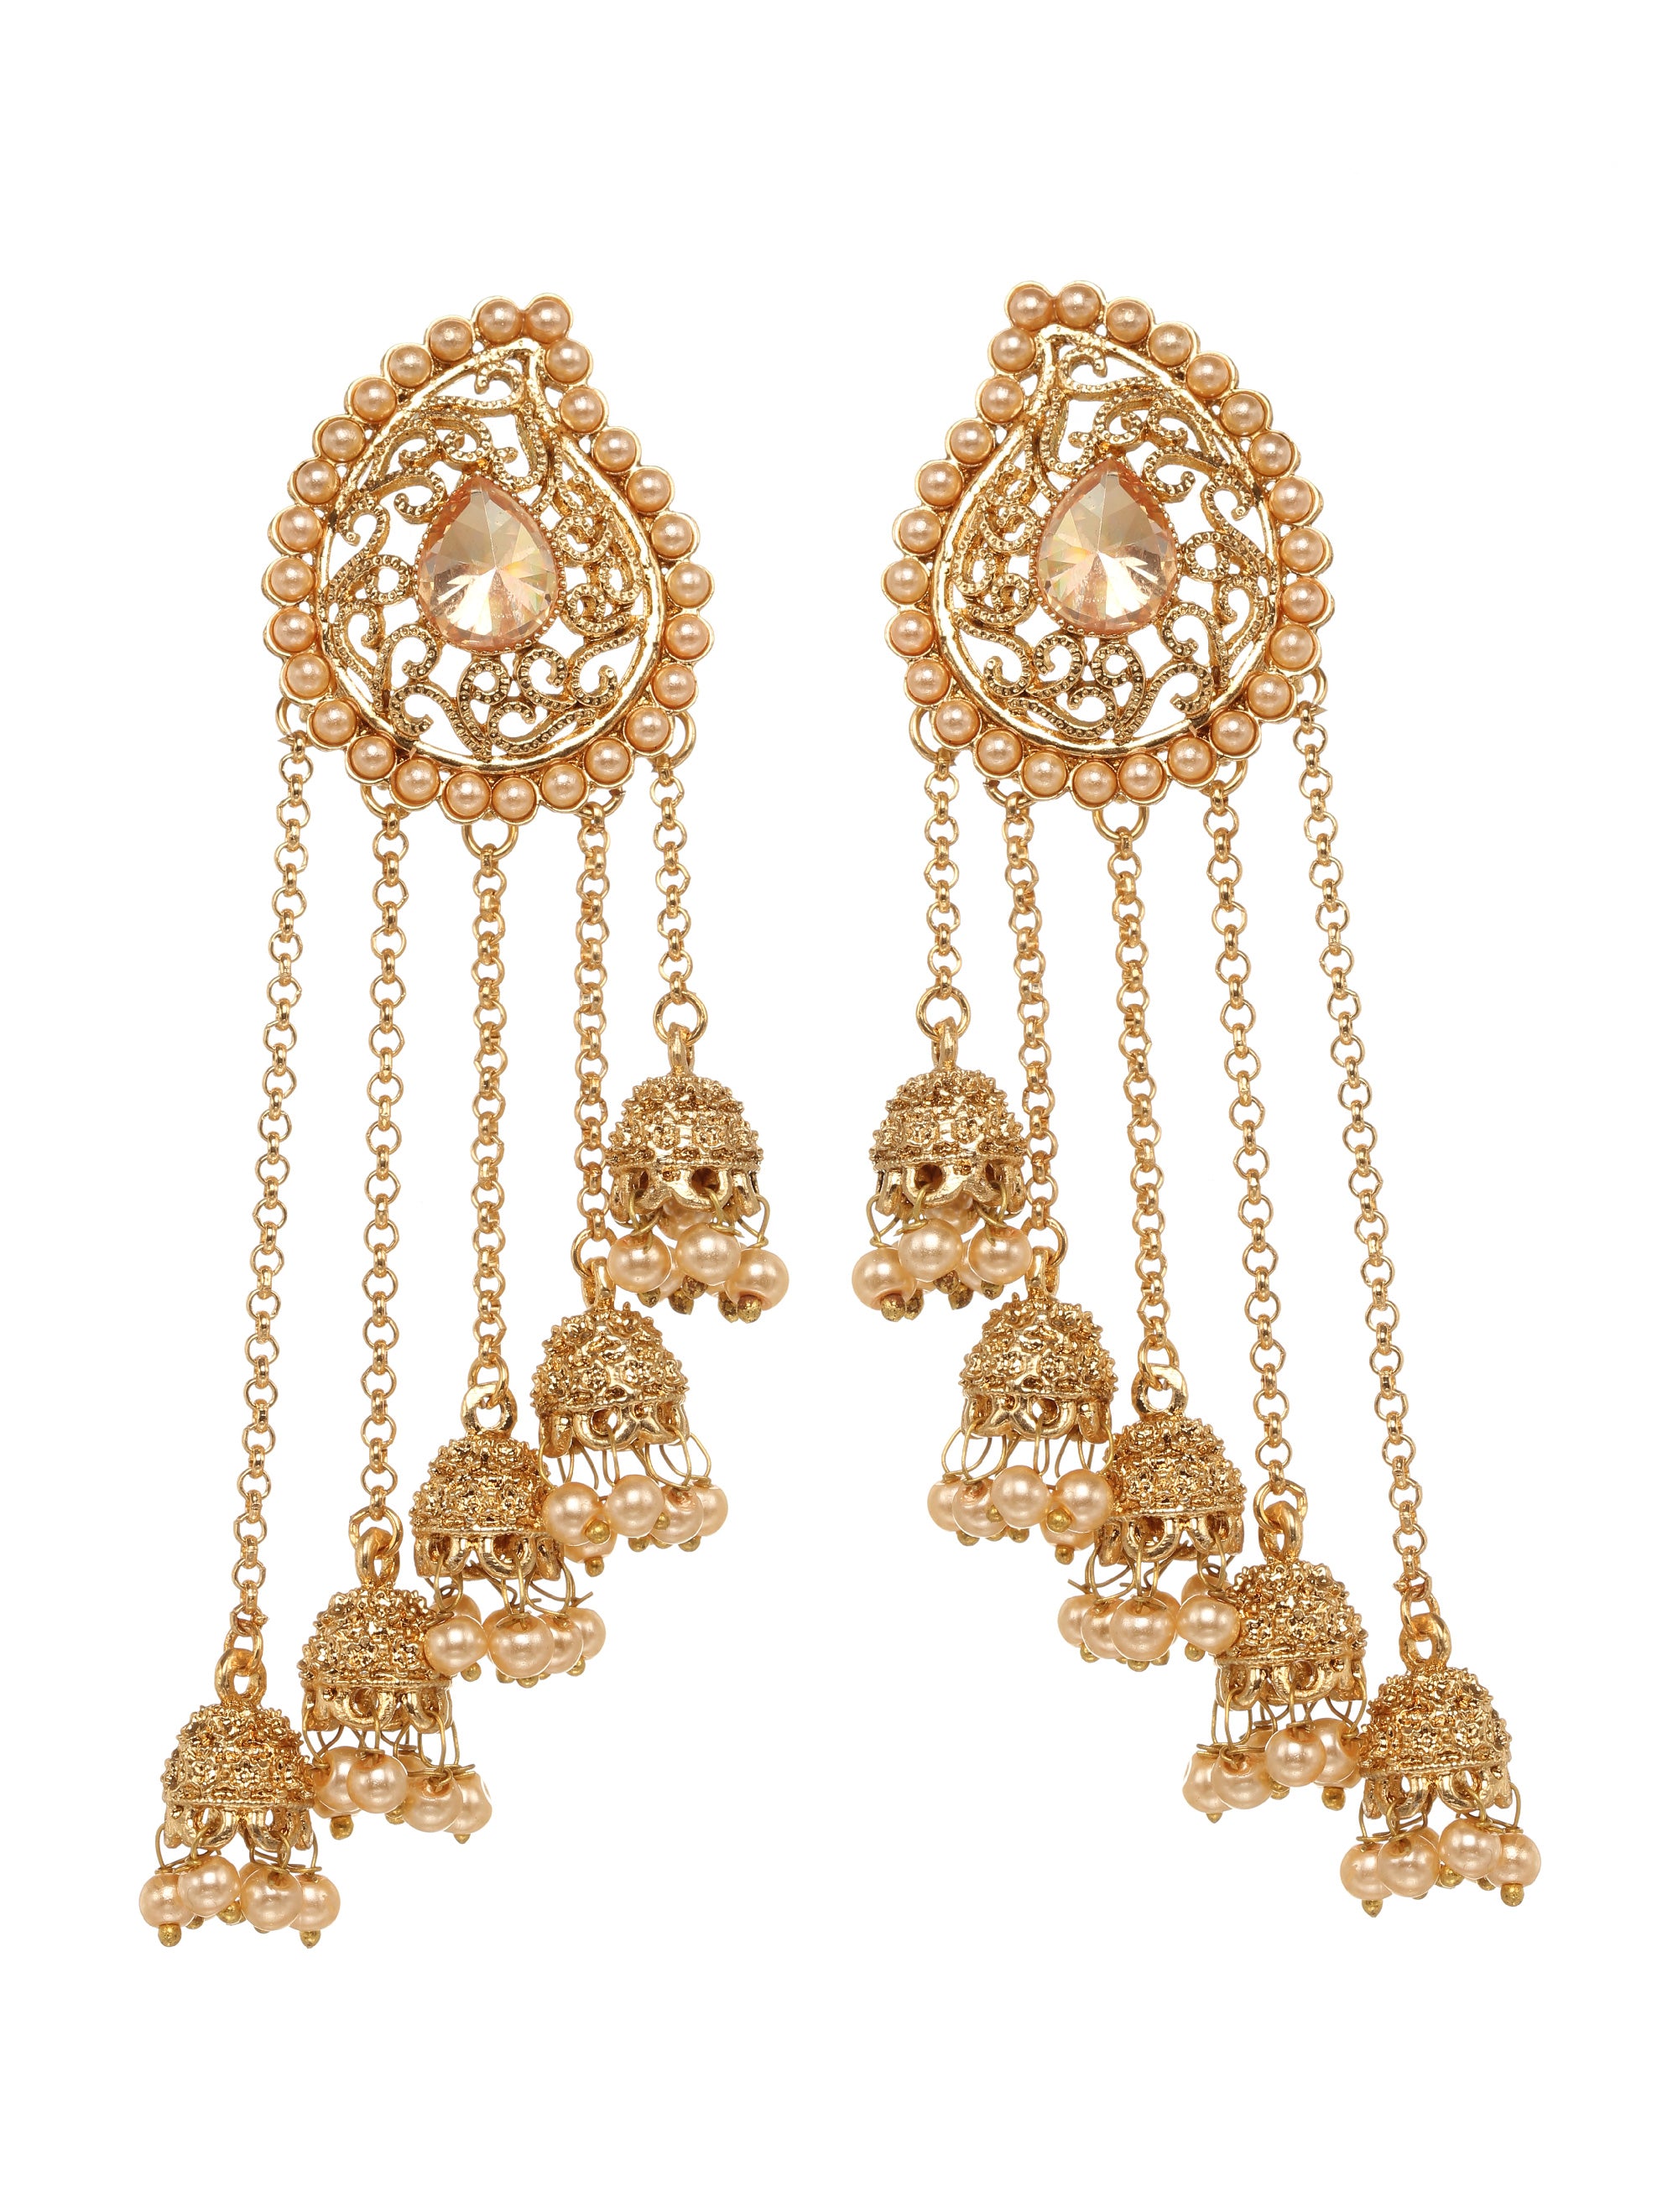 Buy Now Bindhani Women's Gold Earrings For Sarees